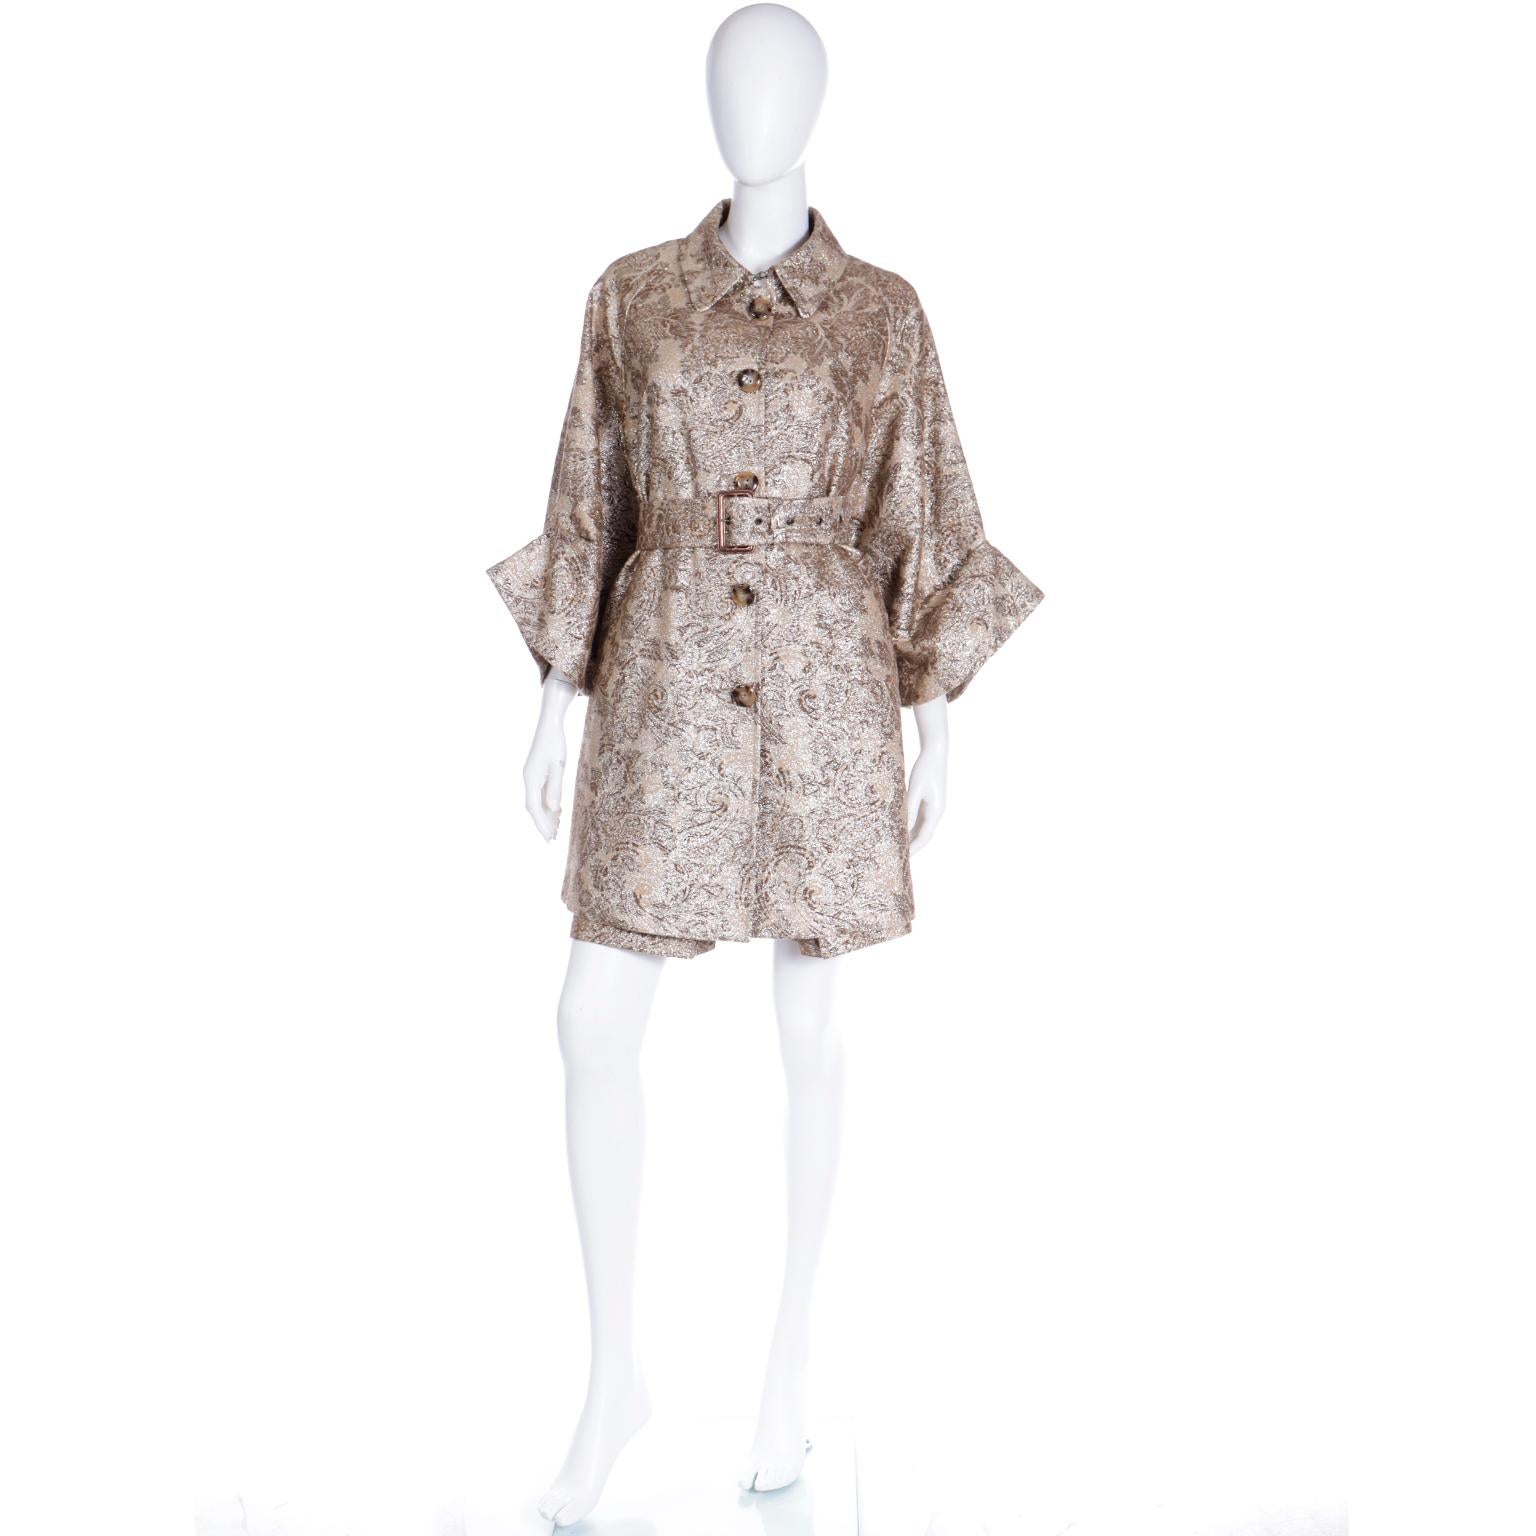 D&G Dolce & Gabbana Gold Floral Dress and Coat With Belt Amy Winehouse 2007 For Sale 3